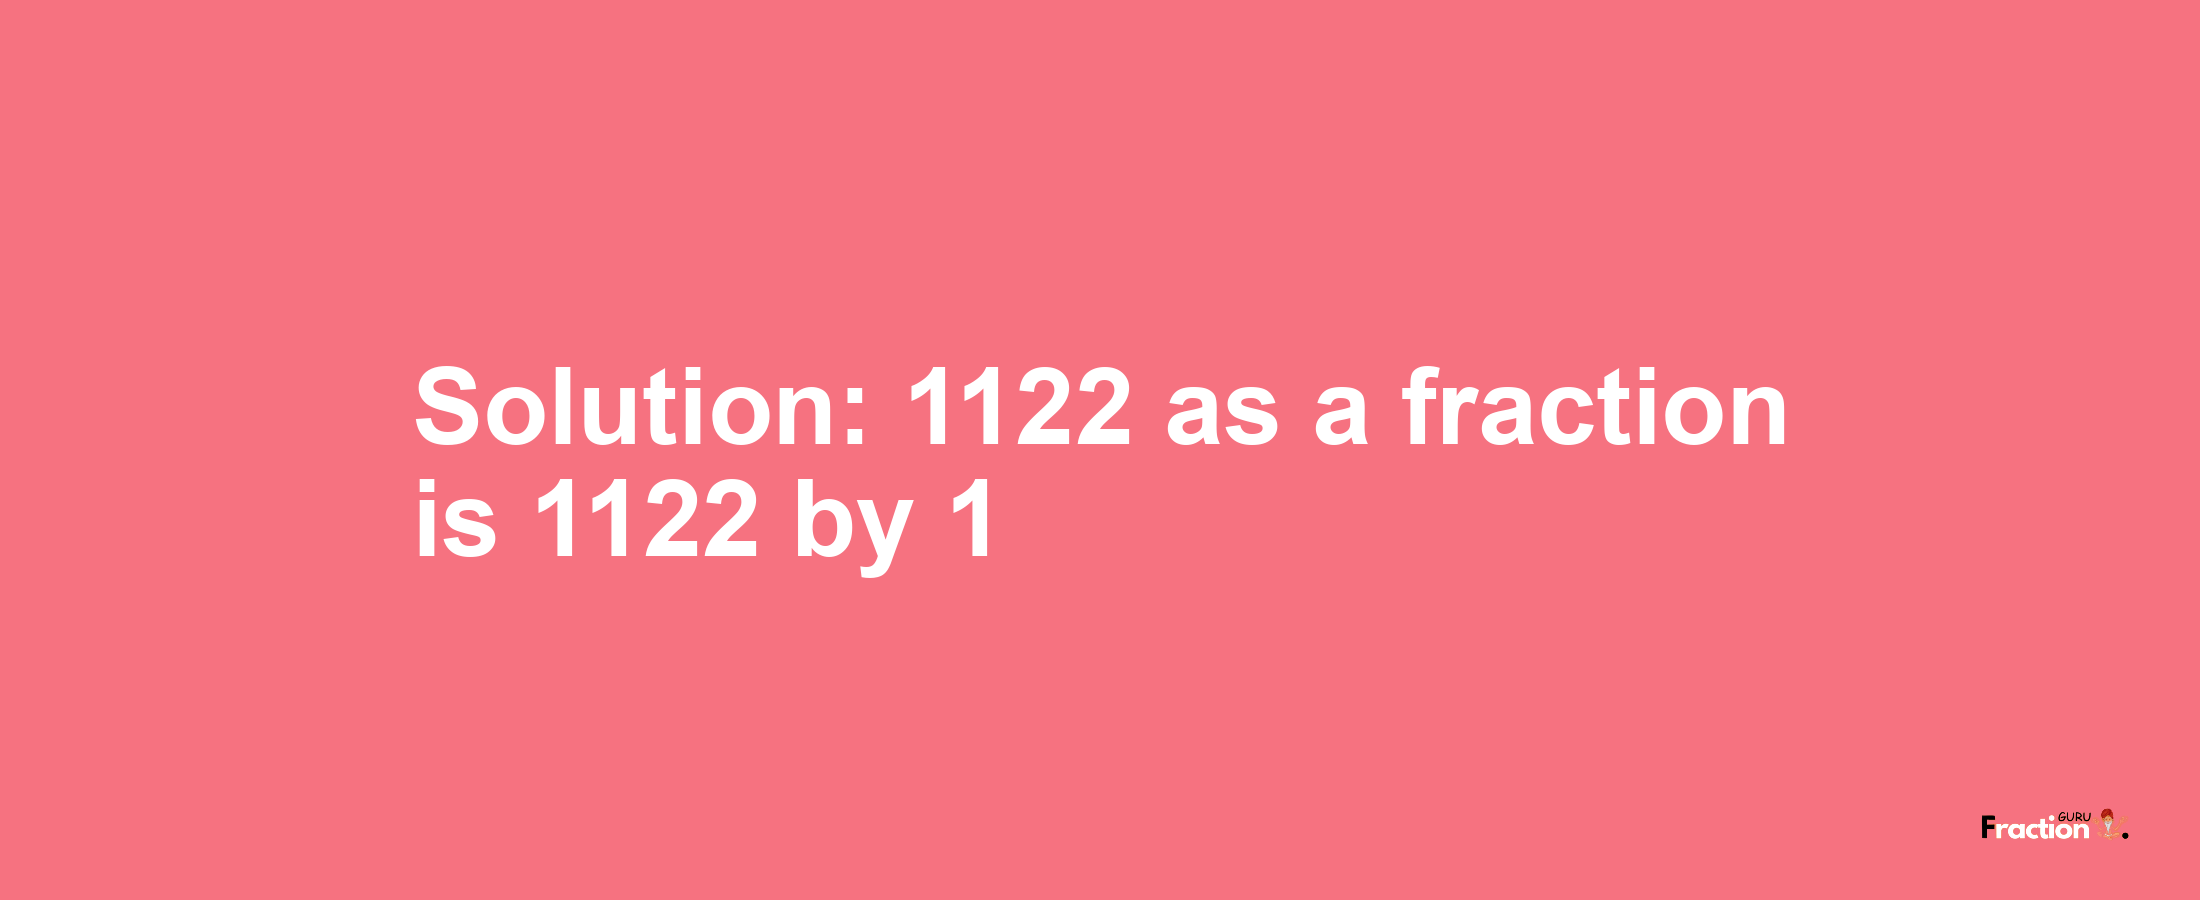 Solution:1122 as a fraction is 1122/1